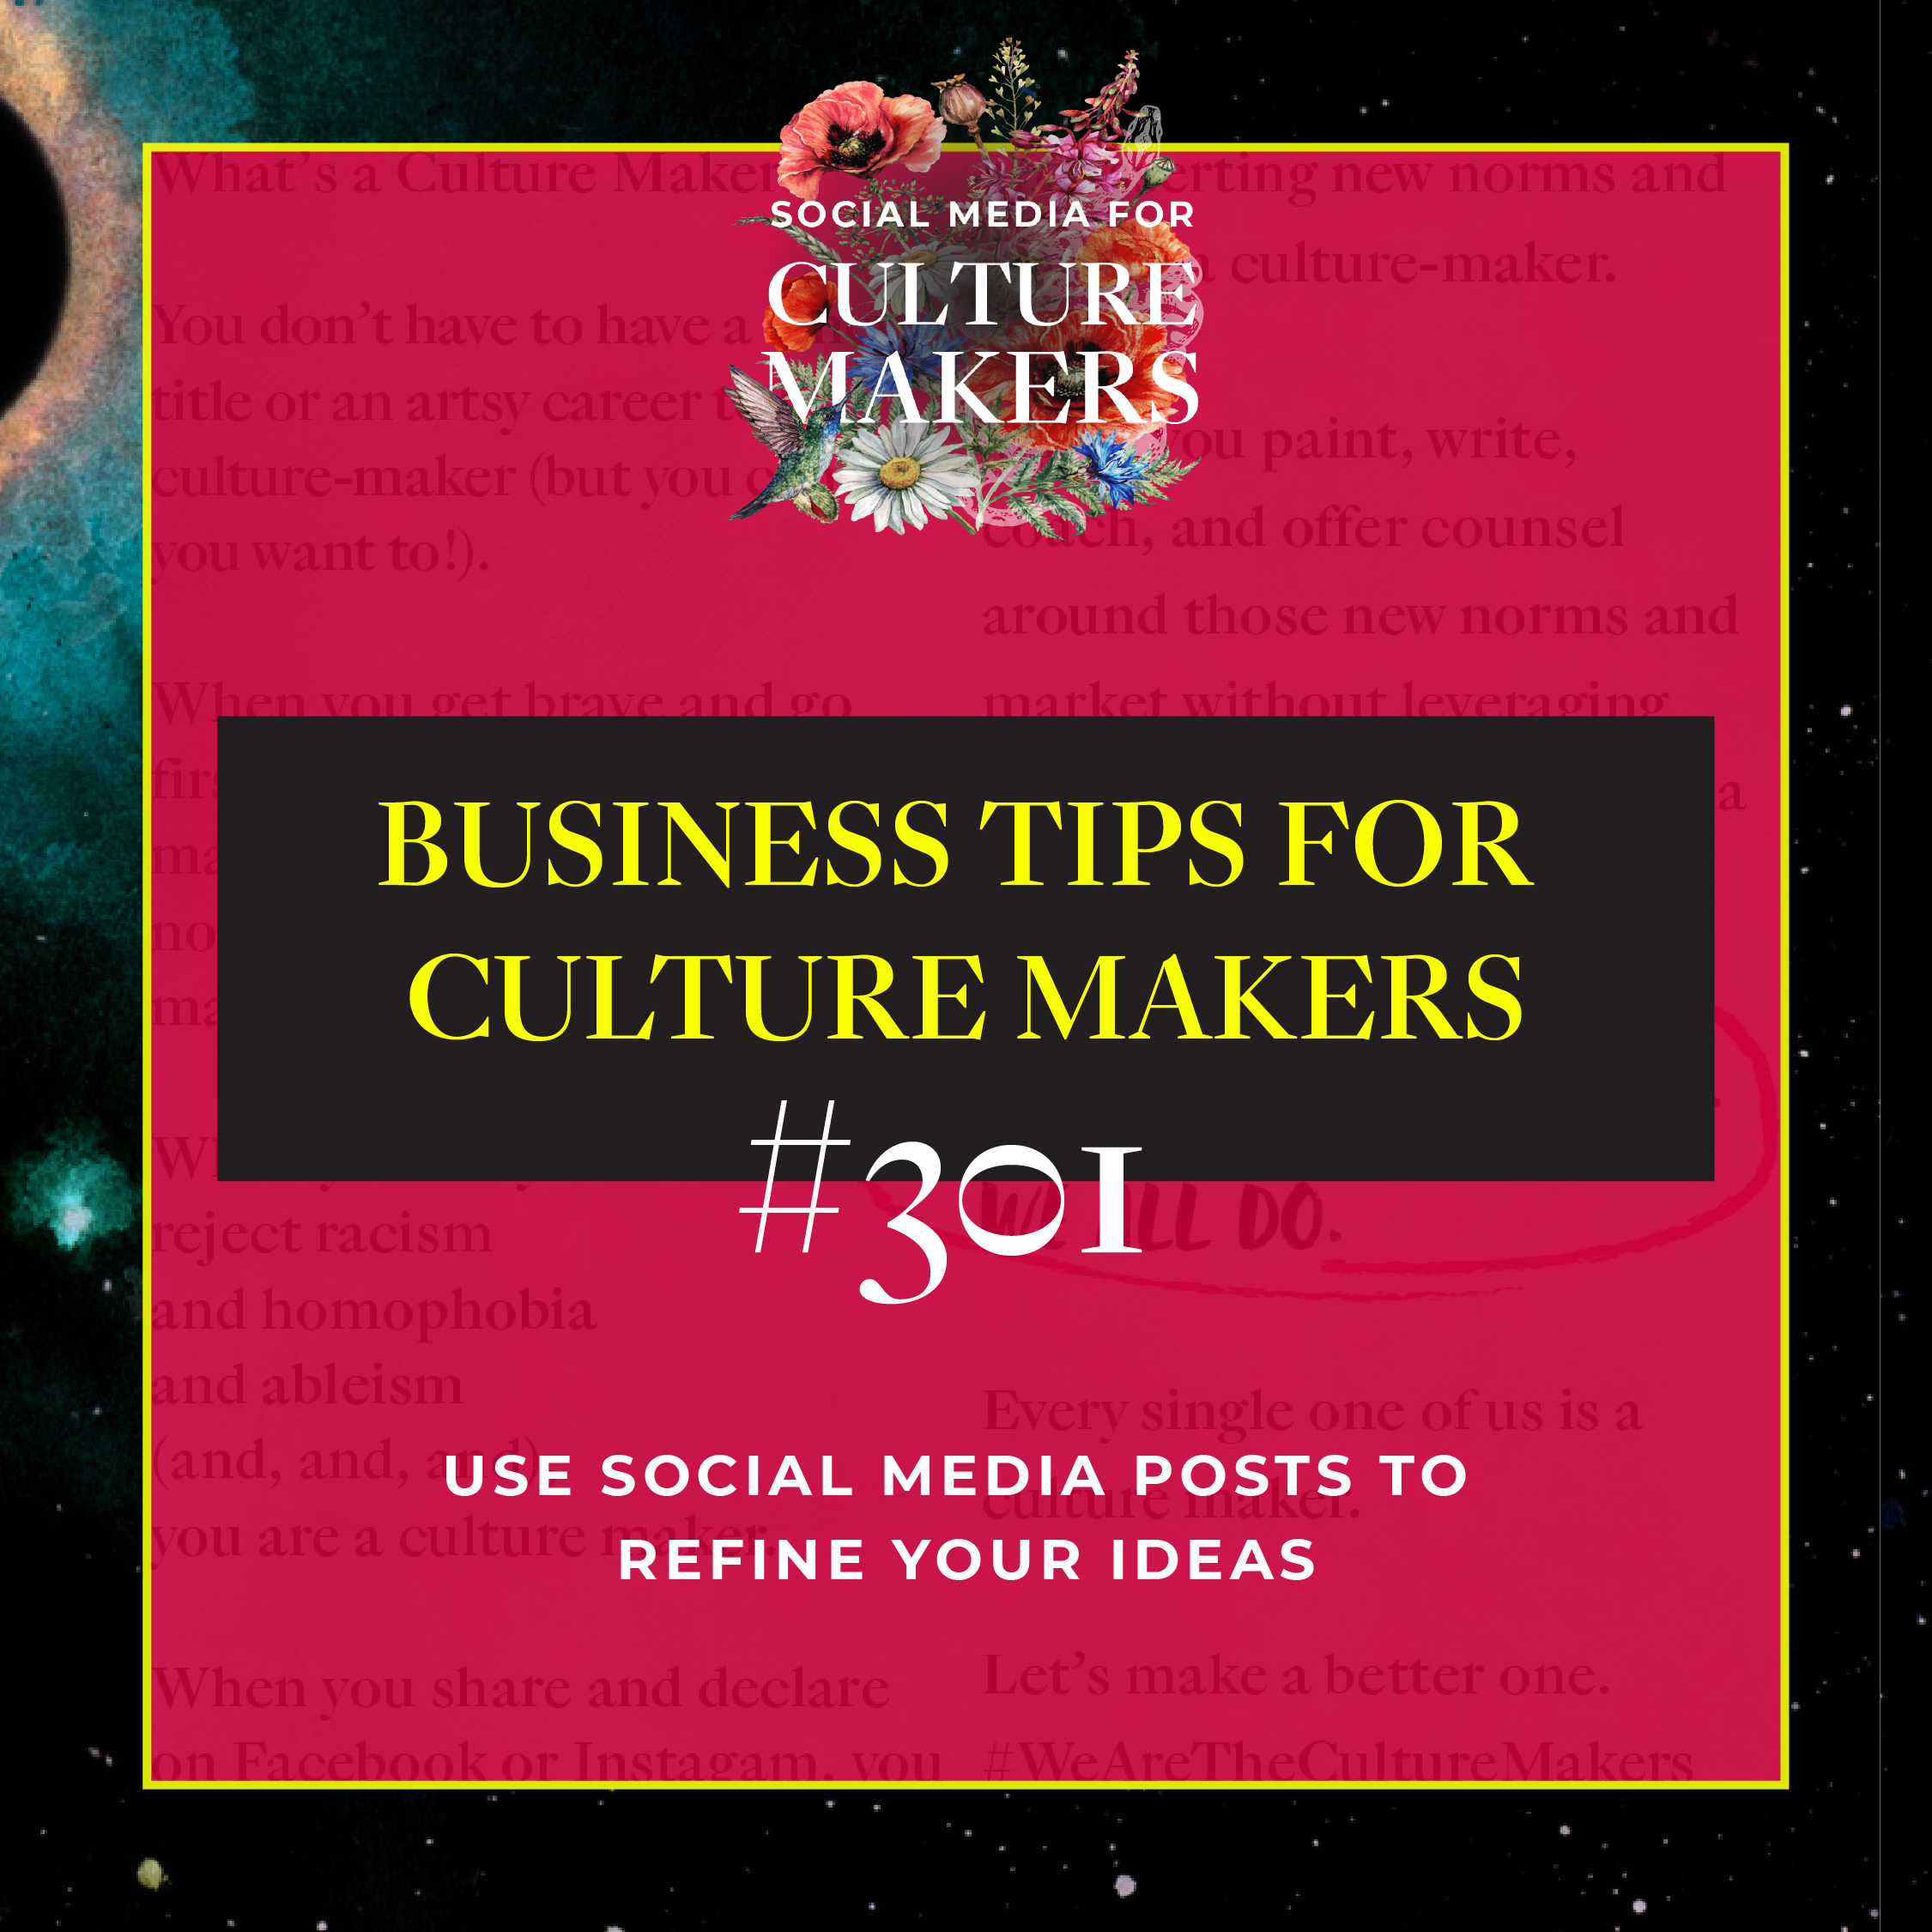 business tips for culture makers 201 use social media posts to refine ideas